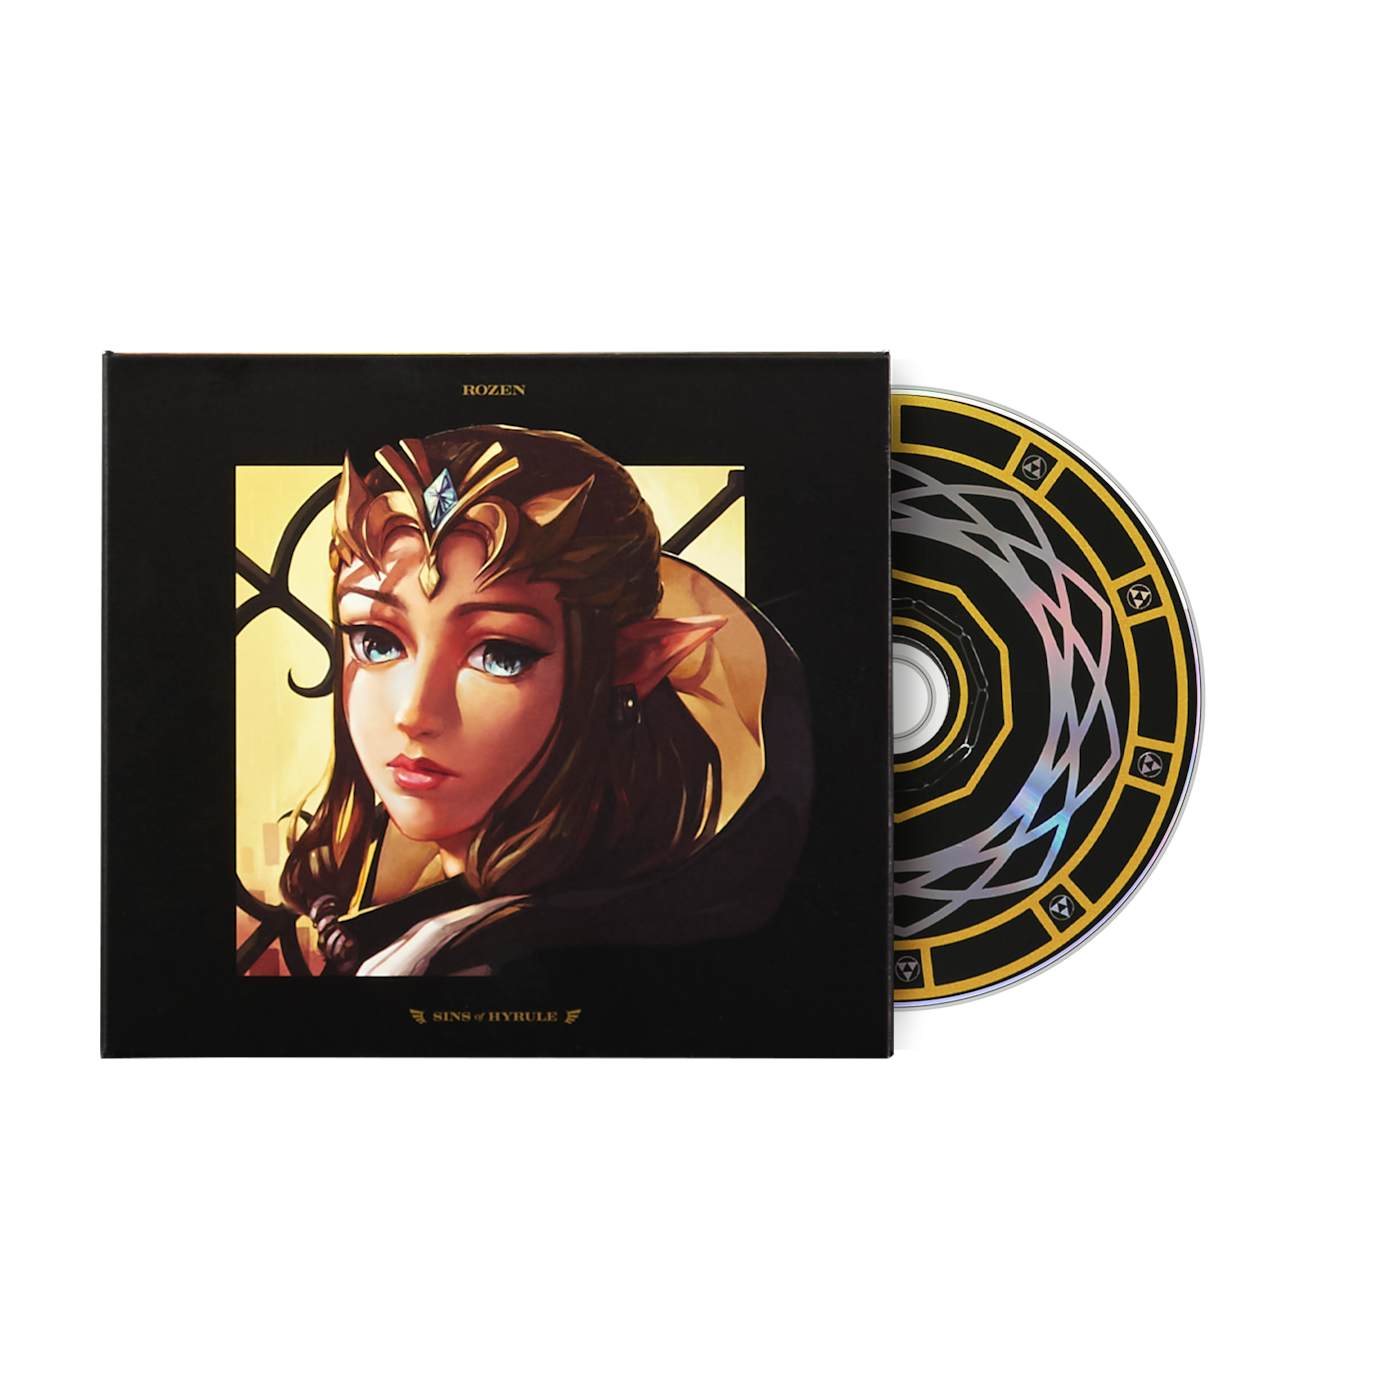 Sins of Hyrule (Second Edition) - ROZEN (Compact Disc)